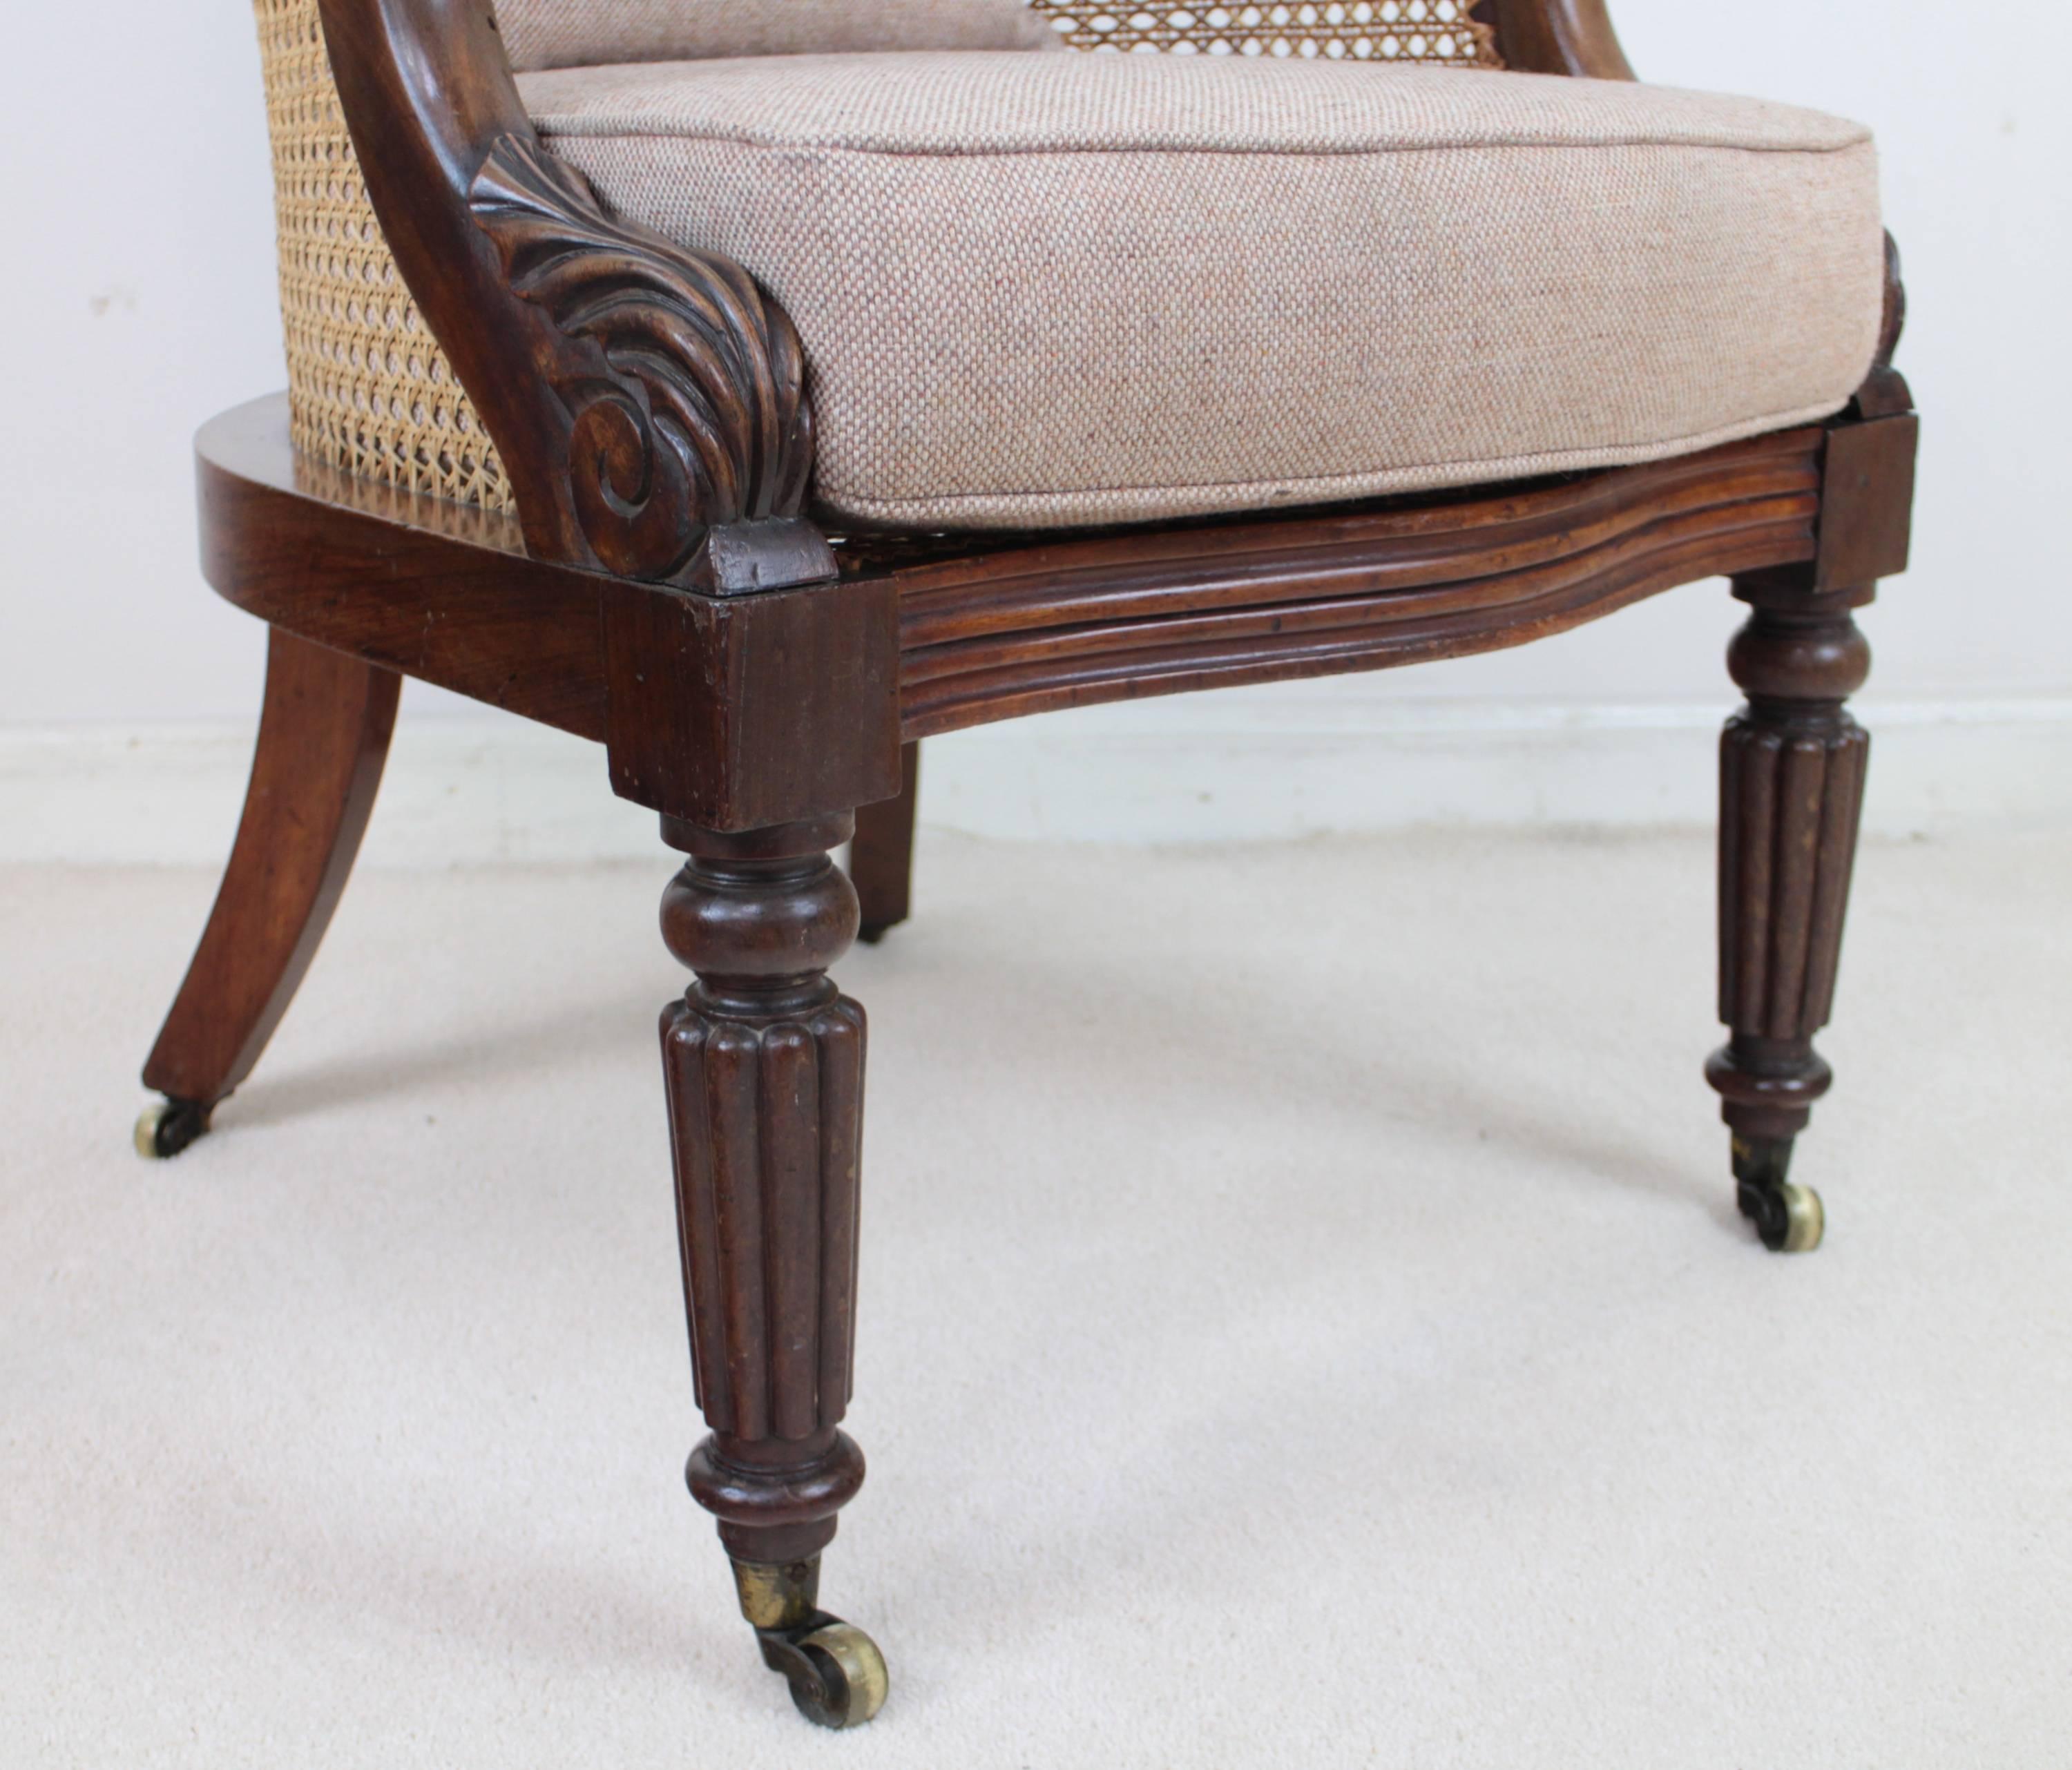 19th Century Regency Mahogany and Cane Filled English Library or Bergère Chair